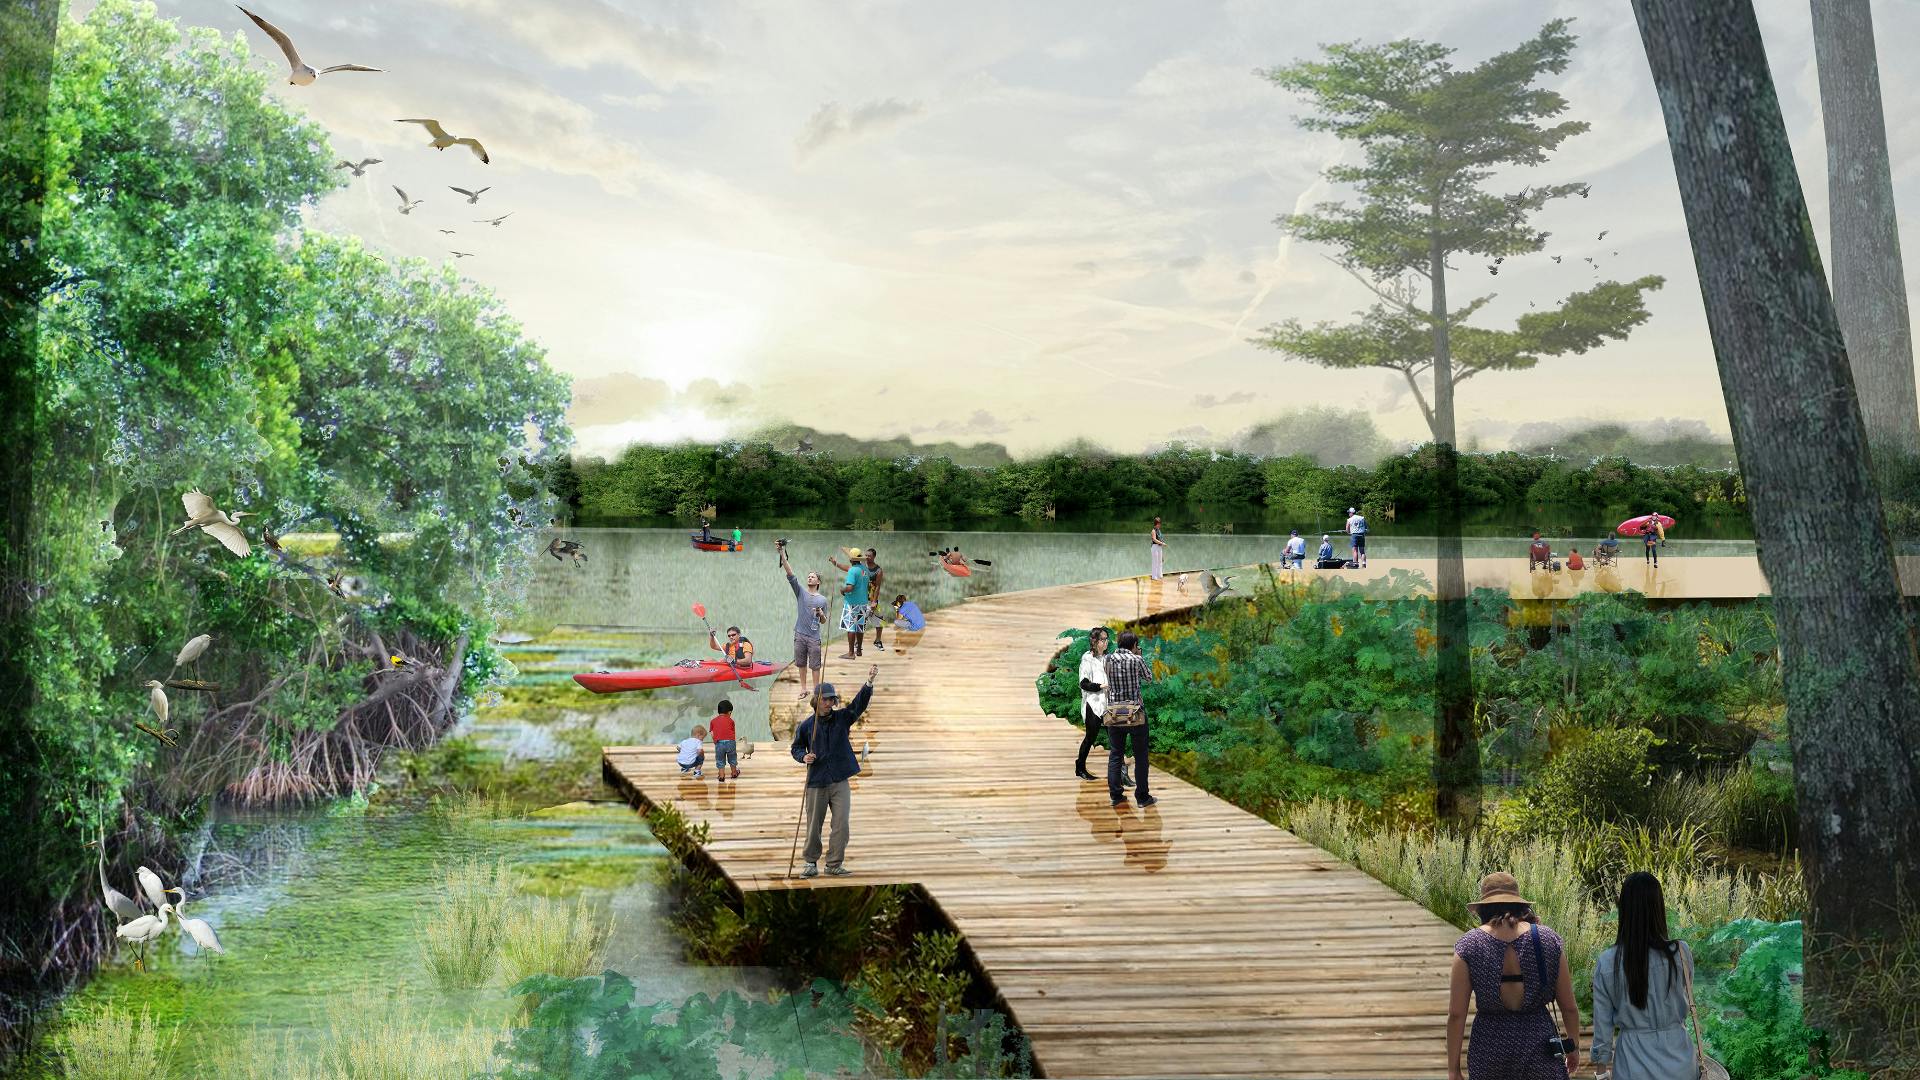 Perspective rendering of a lush landscape along Caño Martín Peña with people kayaking and strolling along the boardwalk.